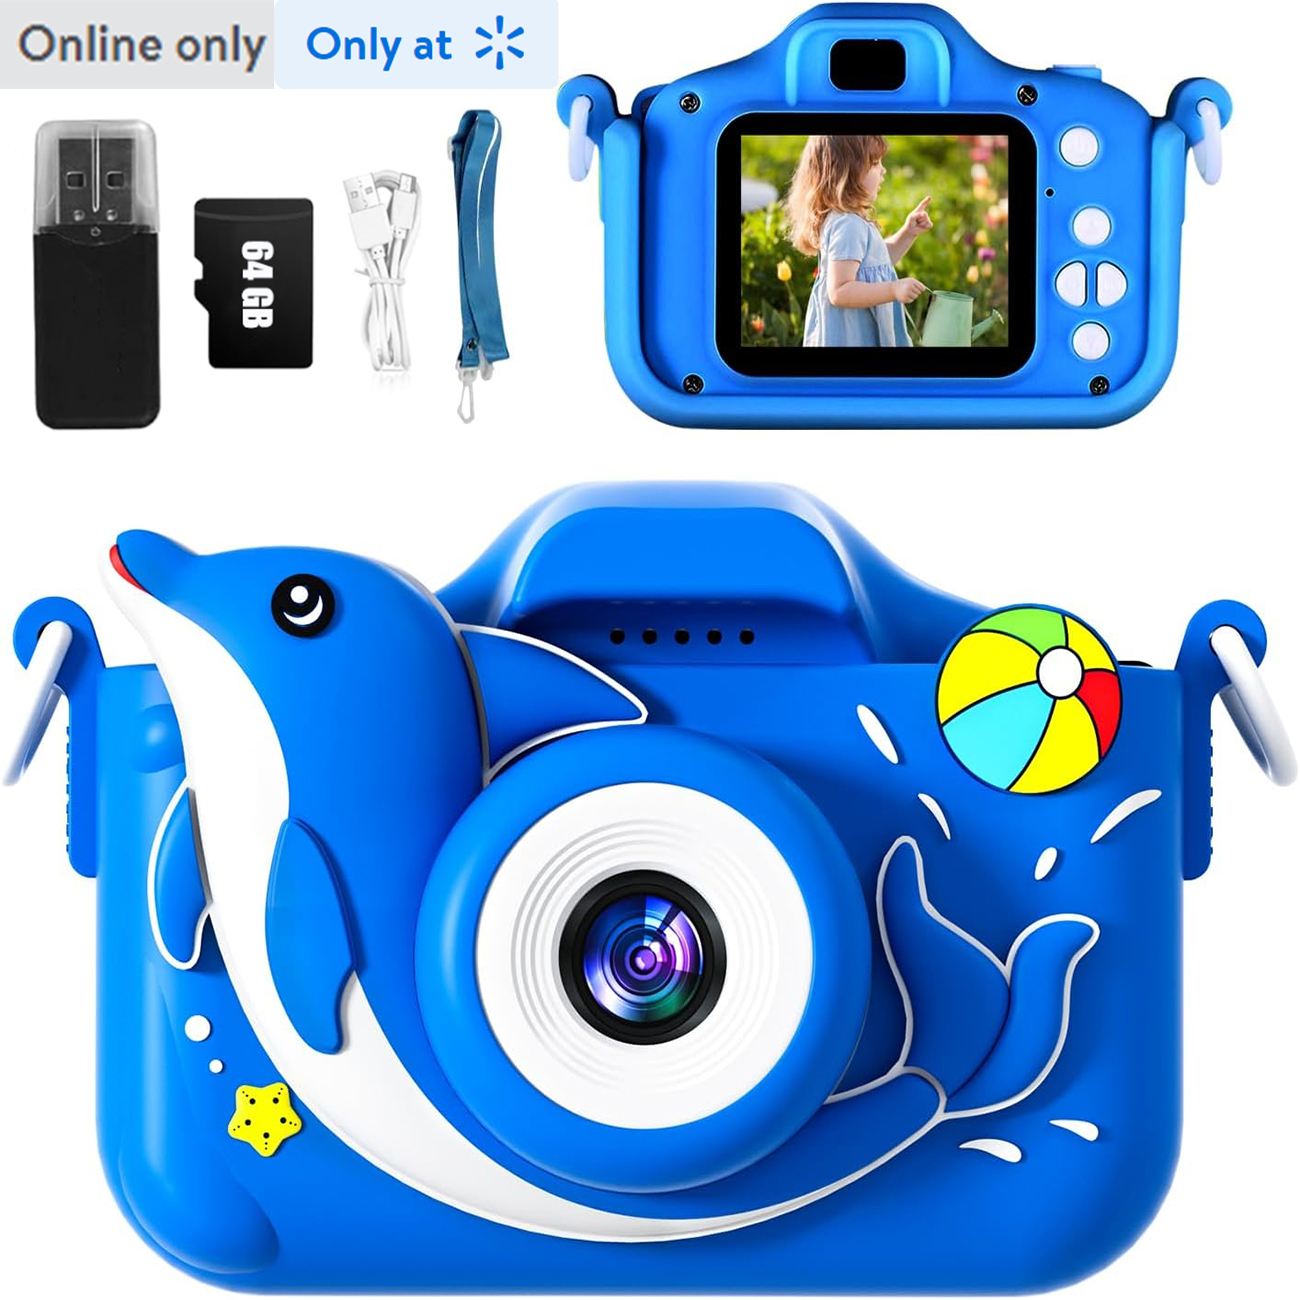 Exciting HD Digital Video Kids Camera - Top Christmas Gift for Girls/Boys Age 3-12! Selfie Camera, Games, 1080P Video, 64GB SD Card Included